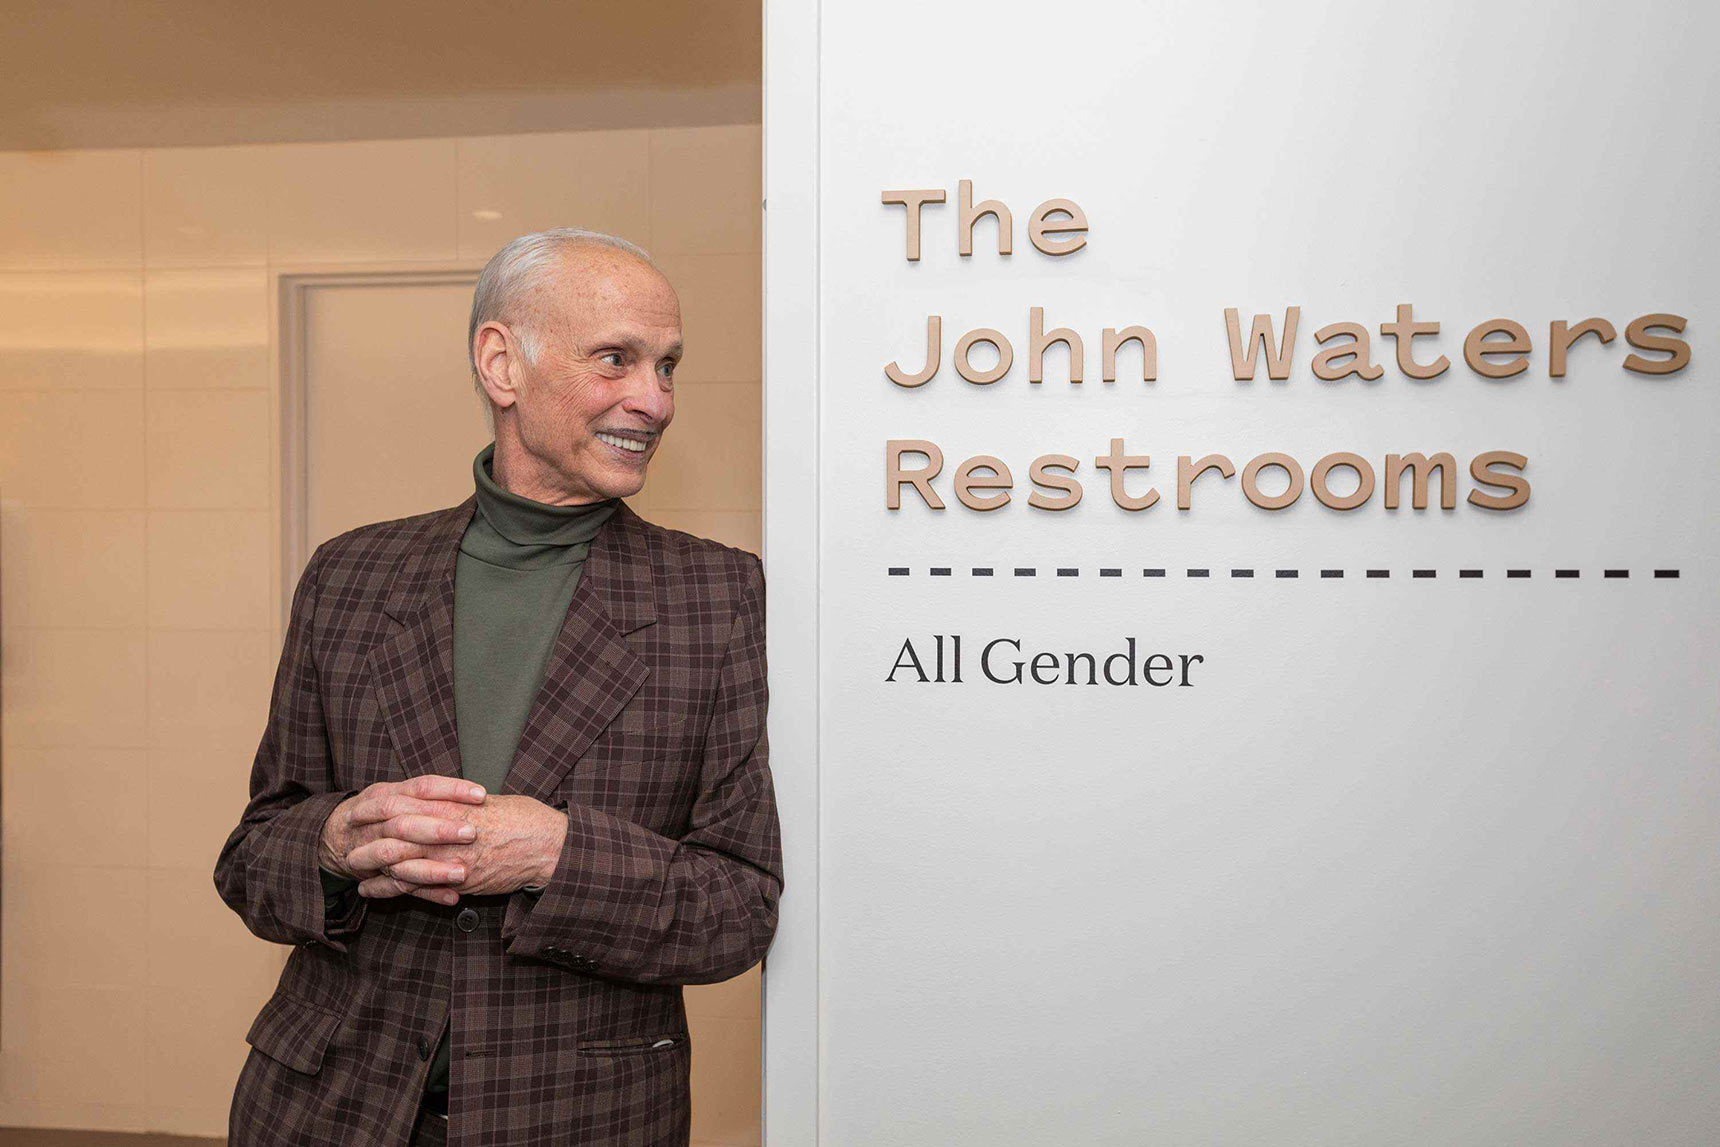 Baltimore Museum of Art brand identity and wayfinding signage John Waters Restrooms, all gender